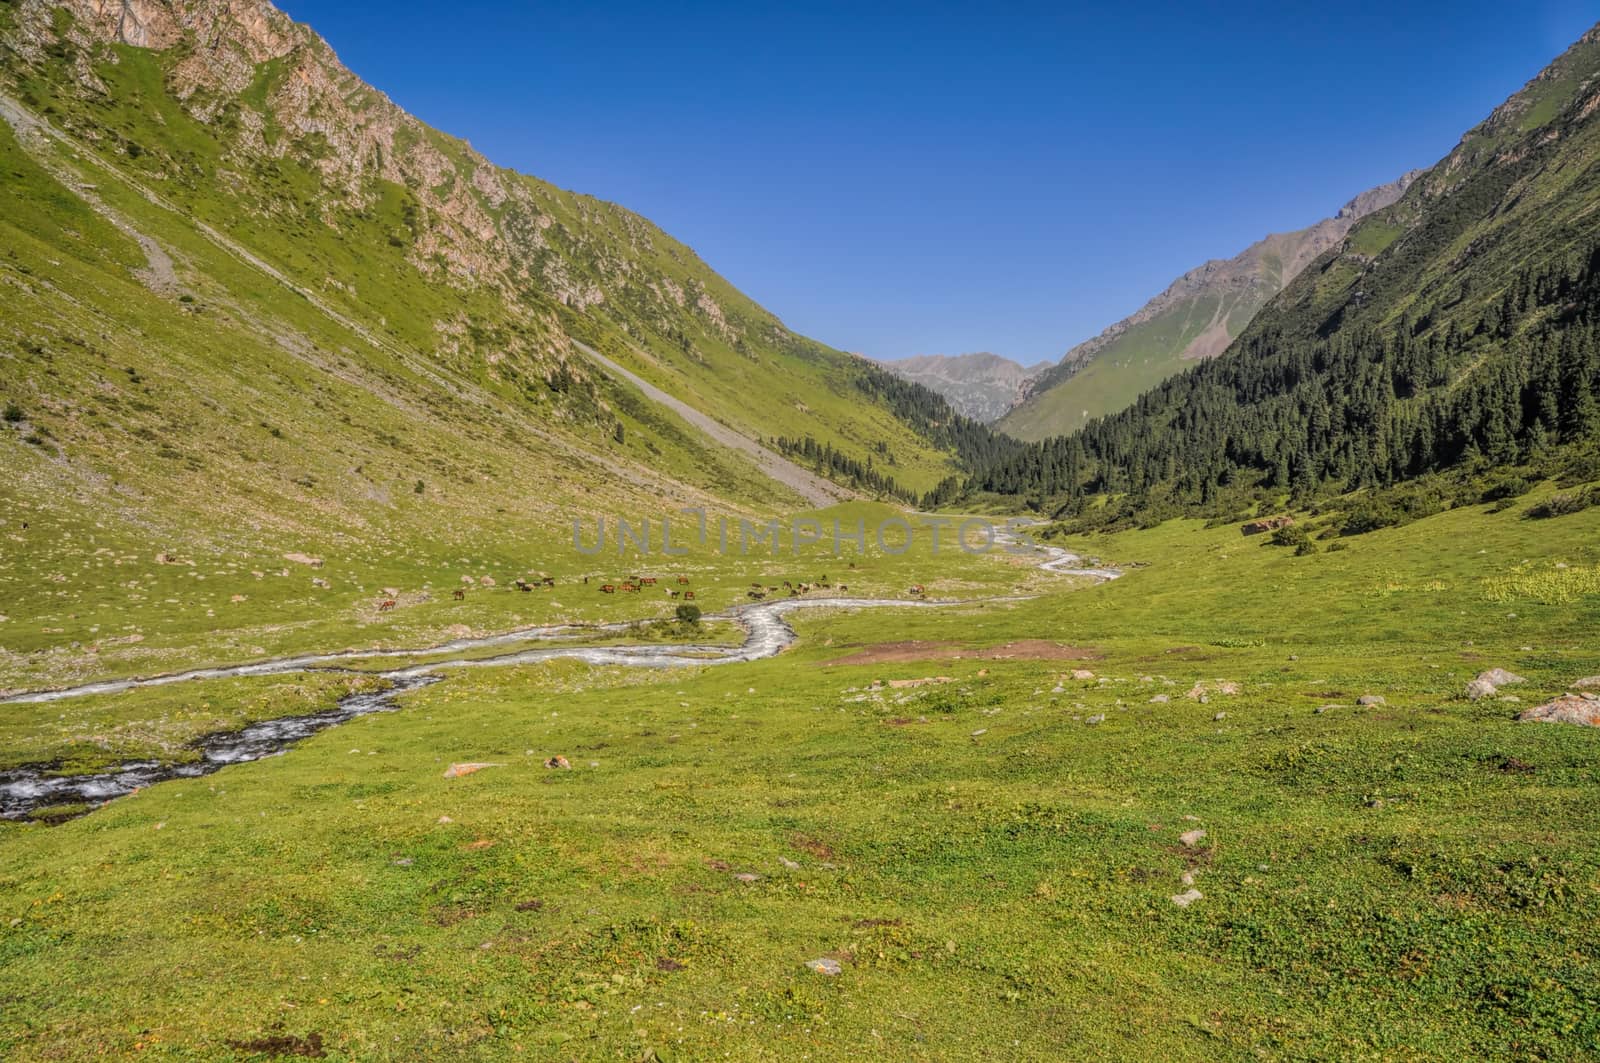 Picturesque view of green valley in Tien-Shan mountain range in Kyrgyzstan